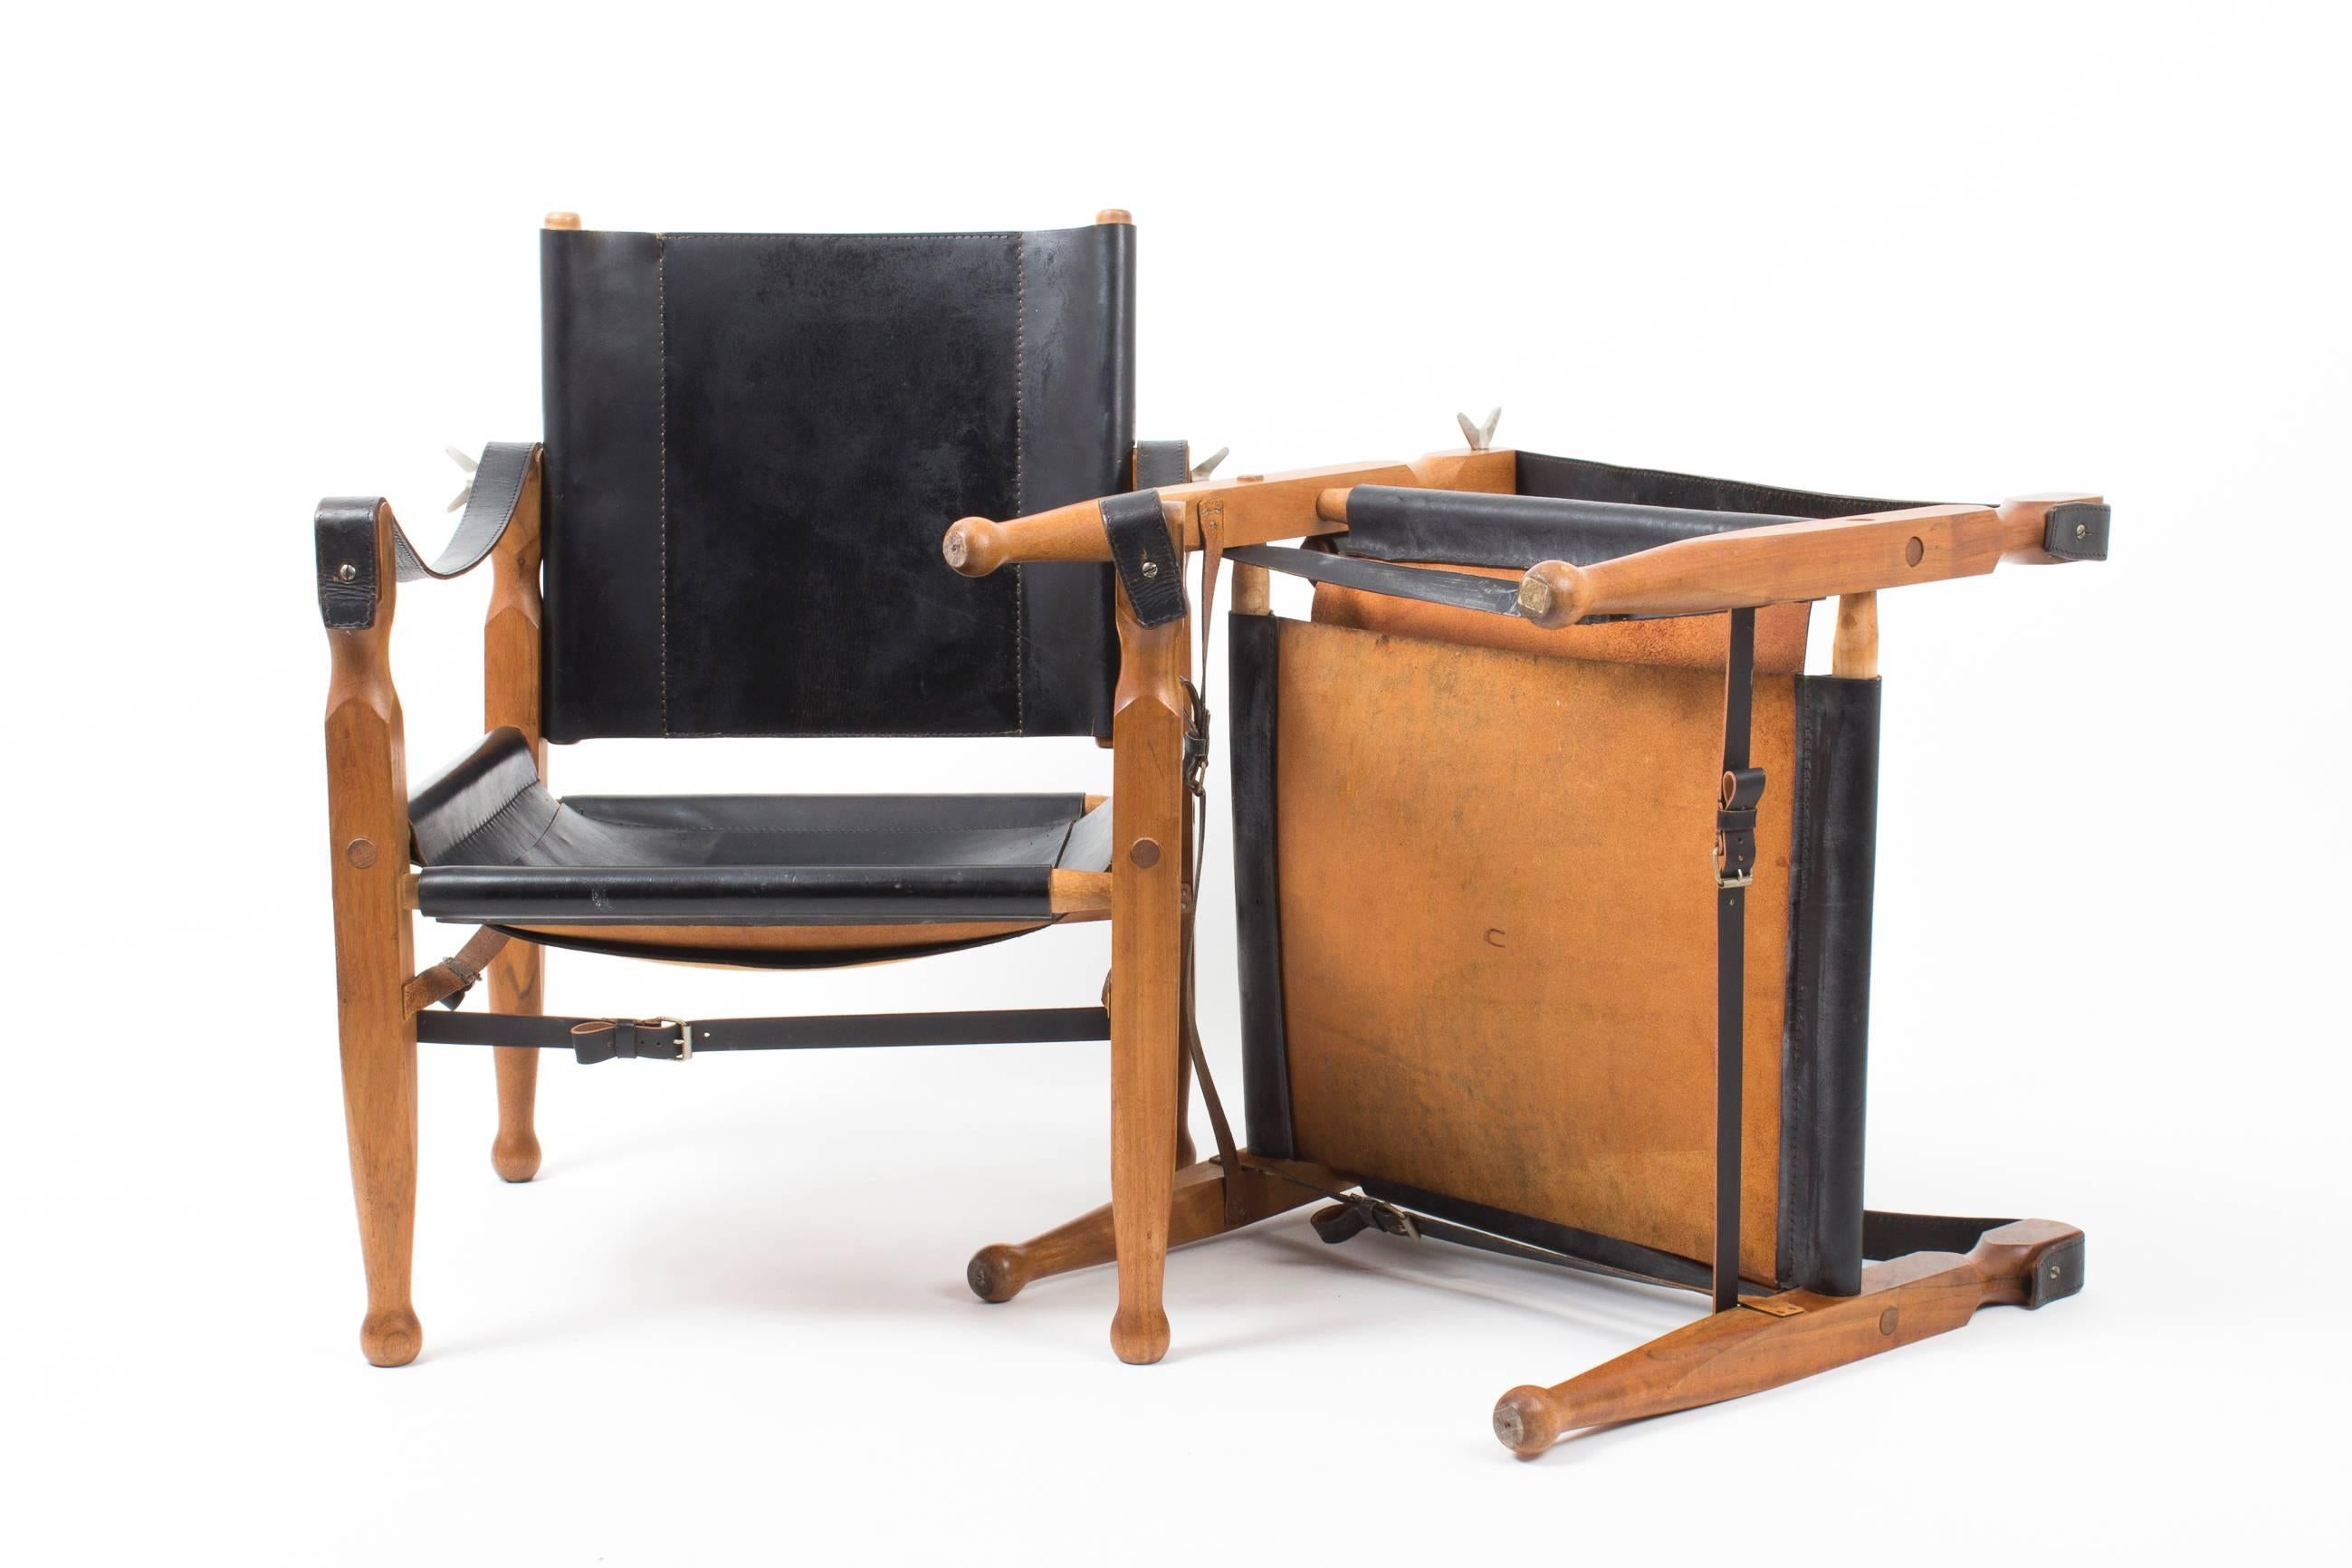 A pair of well known and sought after Auböck safari chairs in mint condition.
Pivoting backrest, wrap strap and arm strap fastened with brass belt buckle detail.

This exceptional pair of safari chairs was restored (strap belt) by the workshop